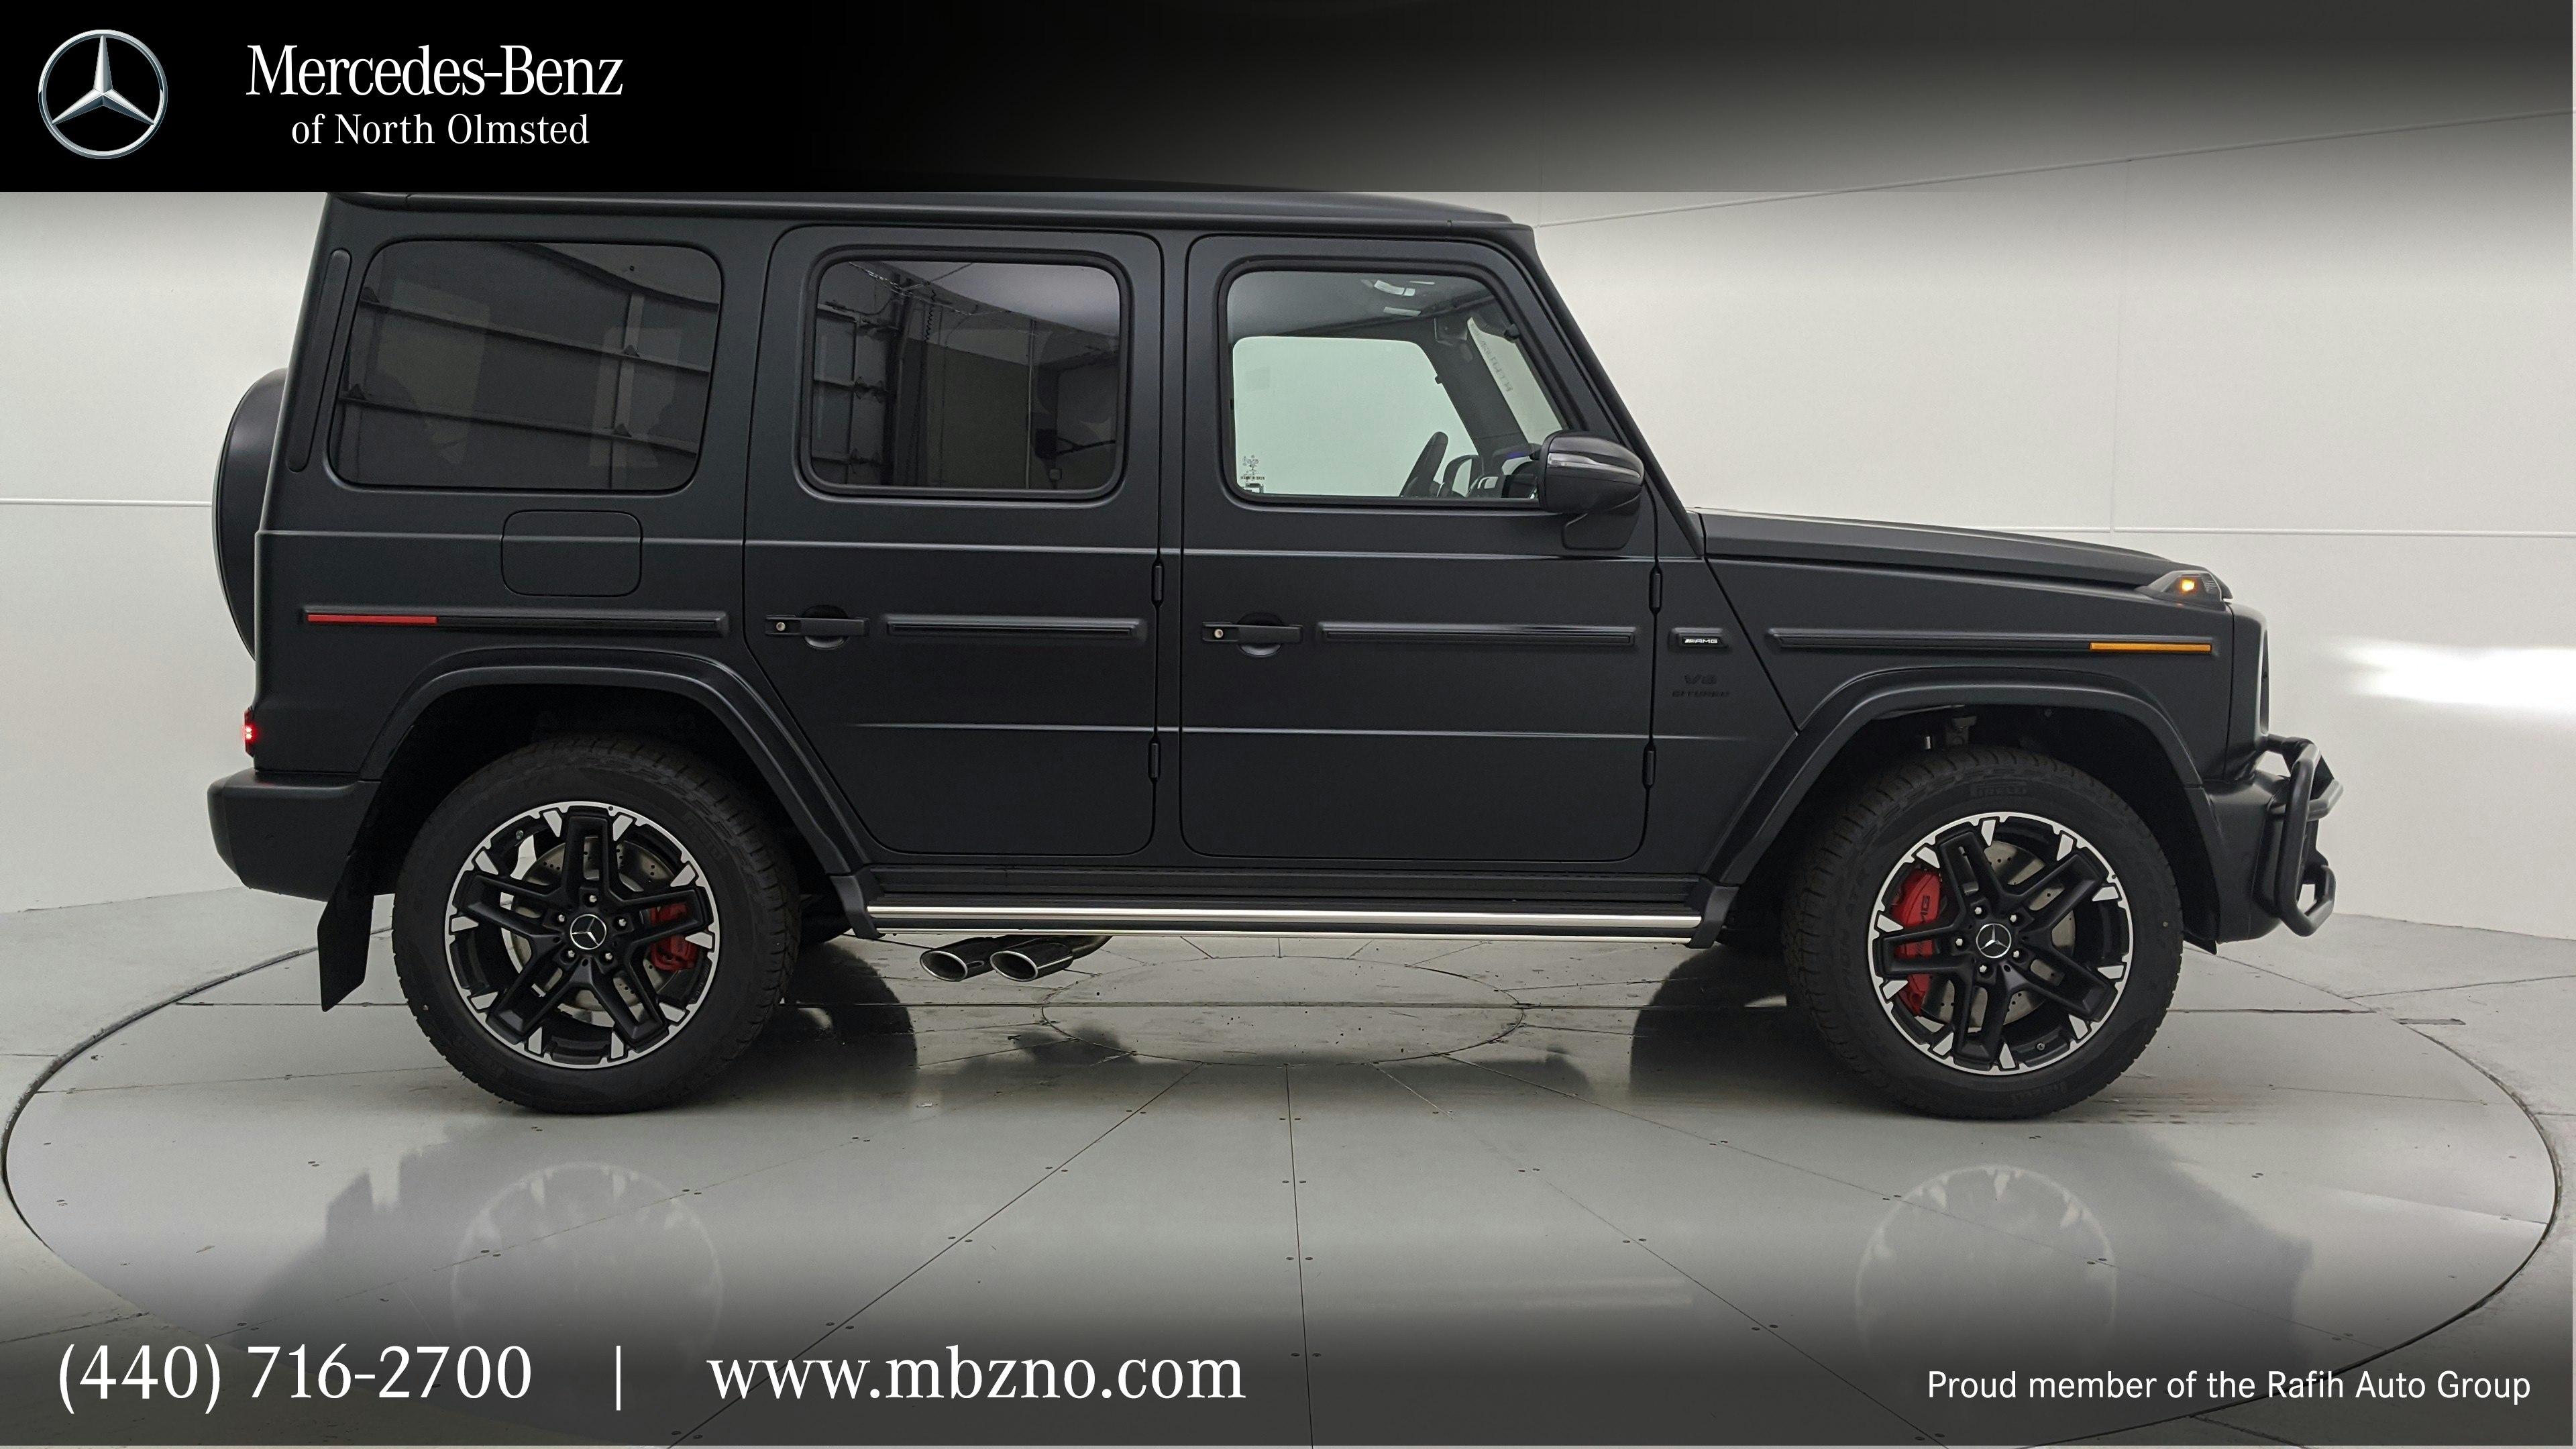 Used Mercedes Benz G Class For Sale Mercedes Benz Of North Olmsted